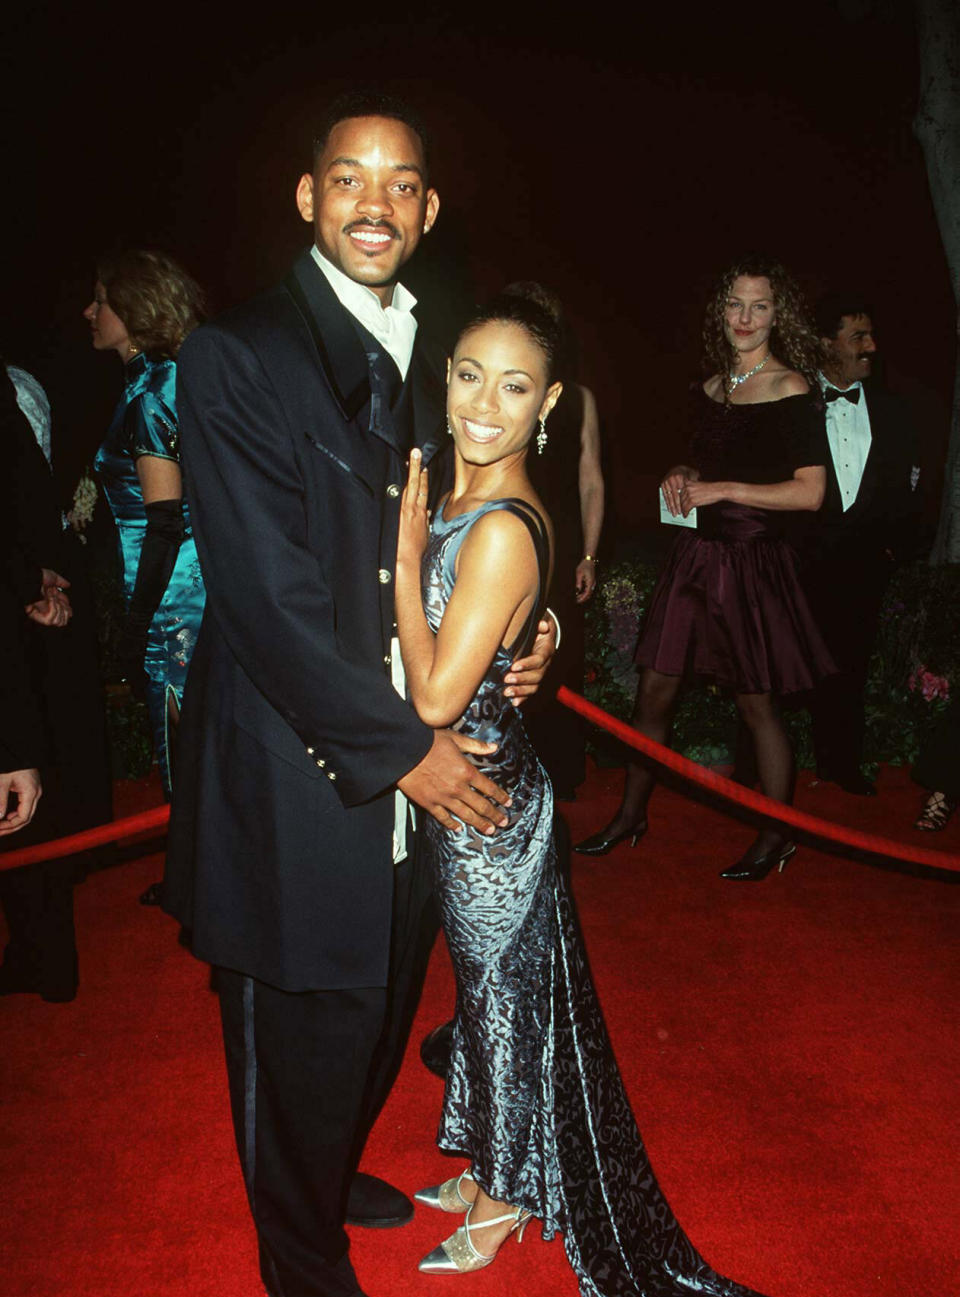 Will Smith and Jada Pinkett smith at the Oscars in 1996. (Photo: Steve Granitz via Getty Images)